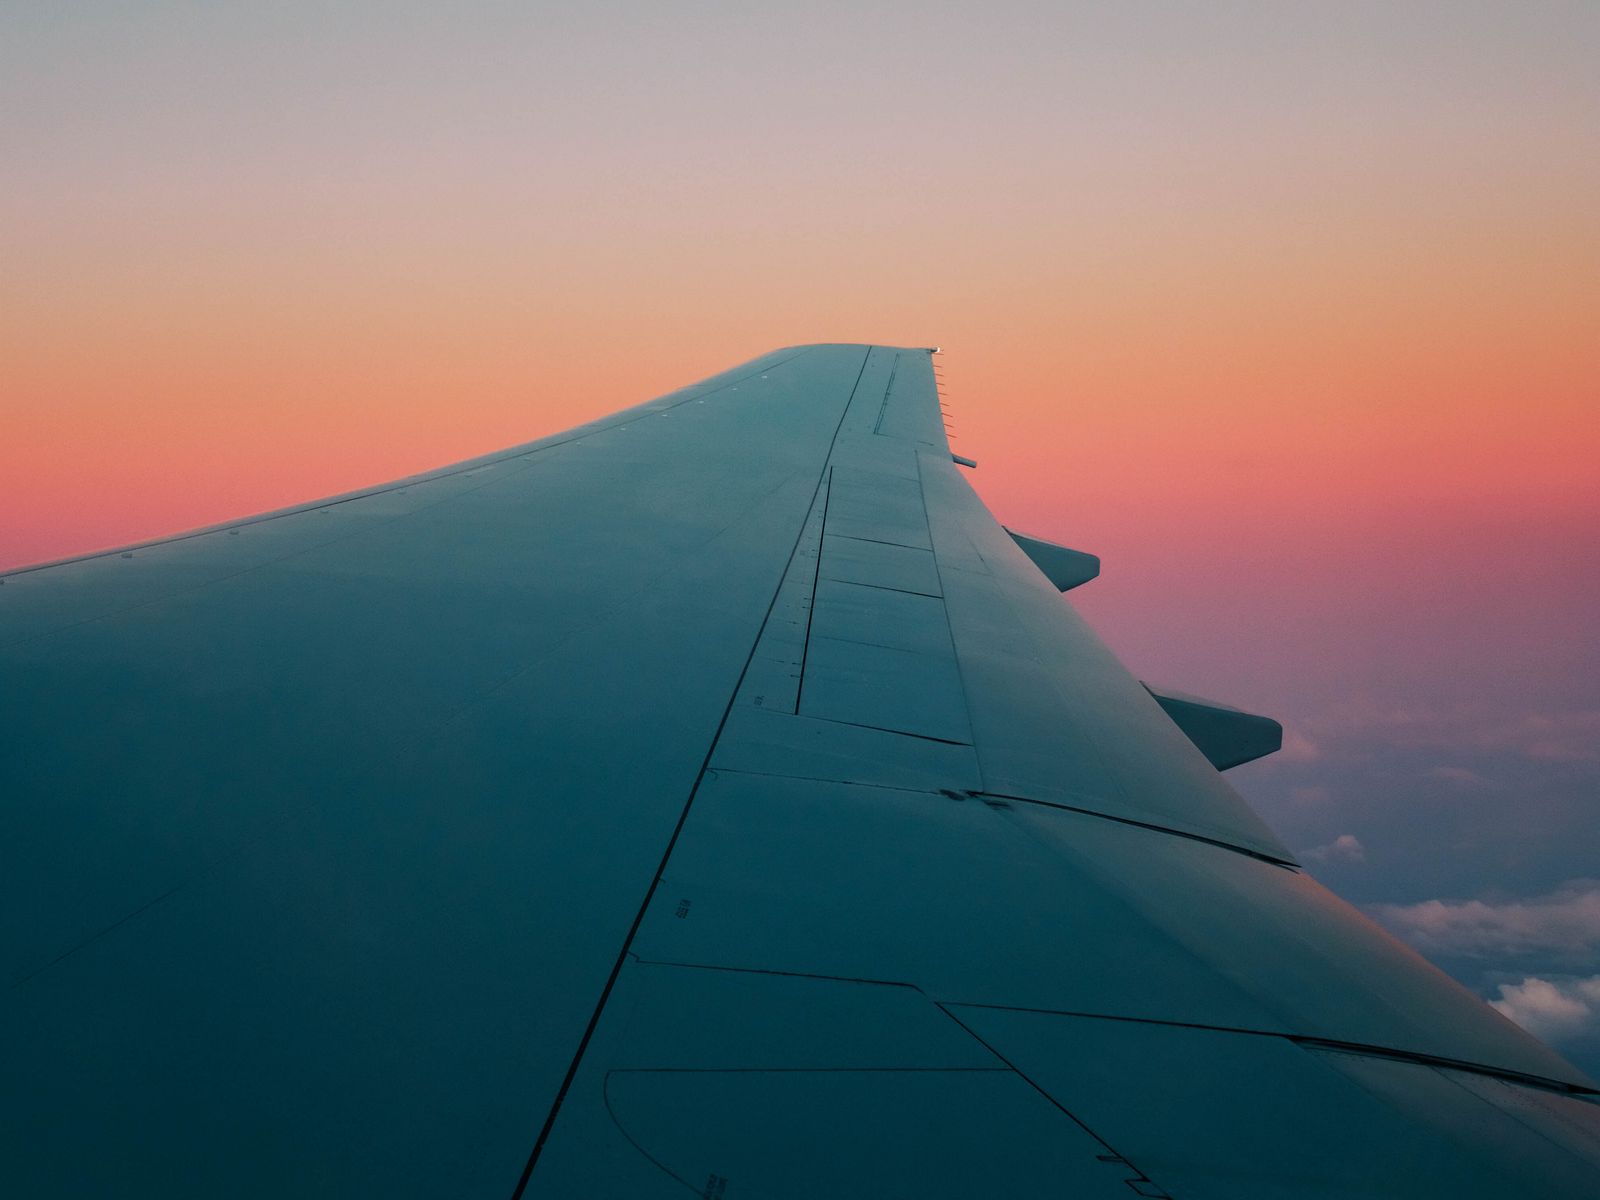 Download wallpaper 1600x1200 airplane wing, plane, sky, flight, clouds standard 4:3 HD background